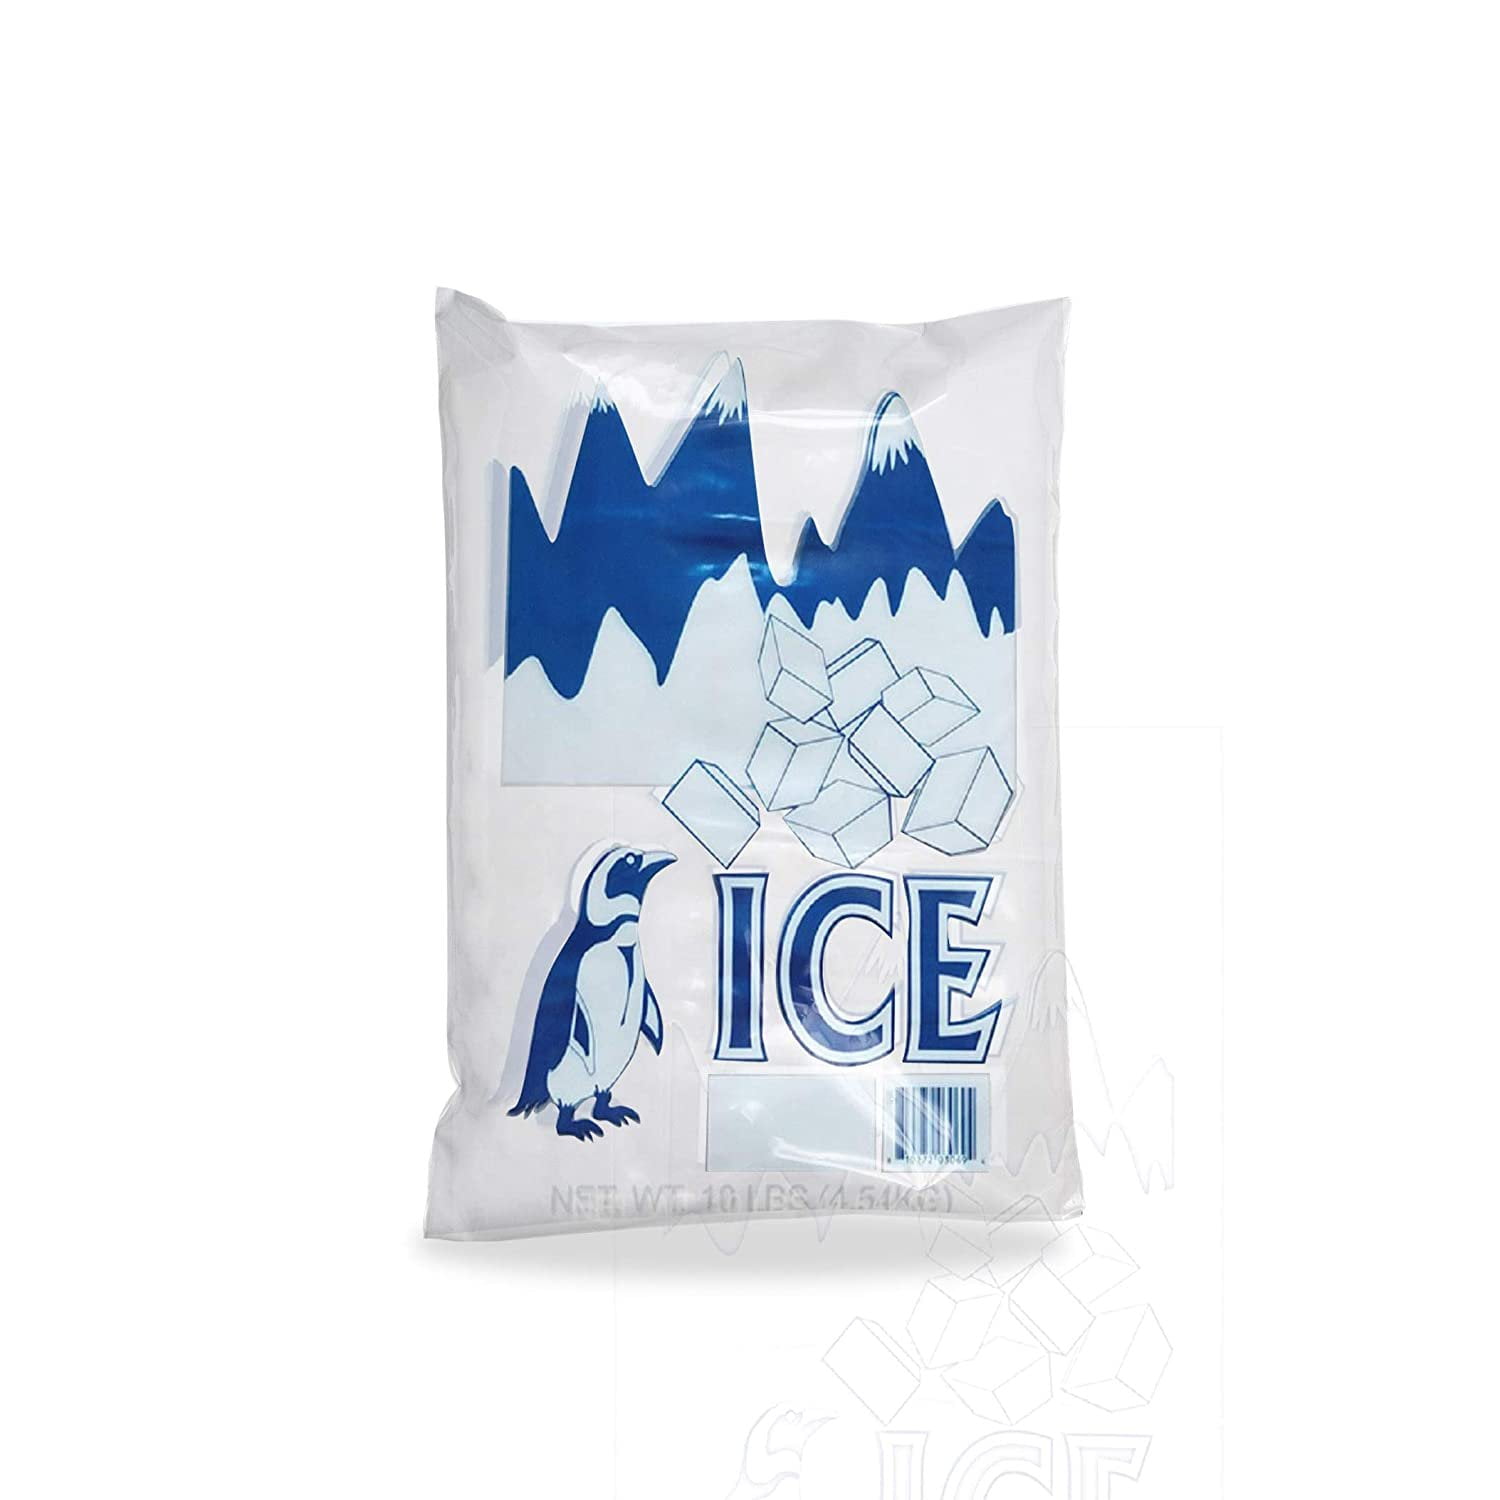 Dropship Pack Of 1000 Plain Top Ice Bags With Twist Ties 5 Lbs 9 X 18.  Printed Bags Ice Bags With Write On Block 9x18. Thickness 1.5 Mil.  Industrial Grade Safe Plastic